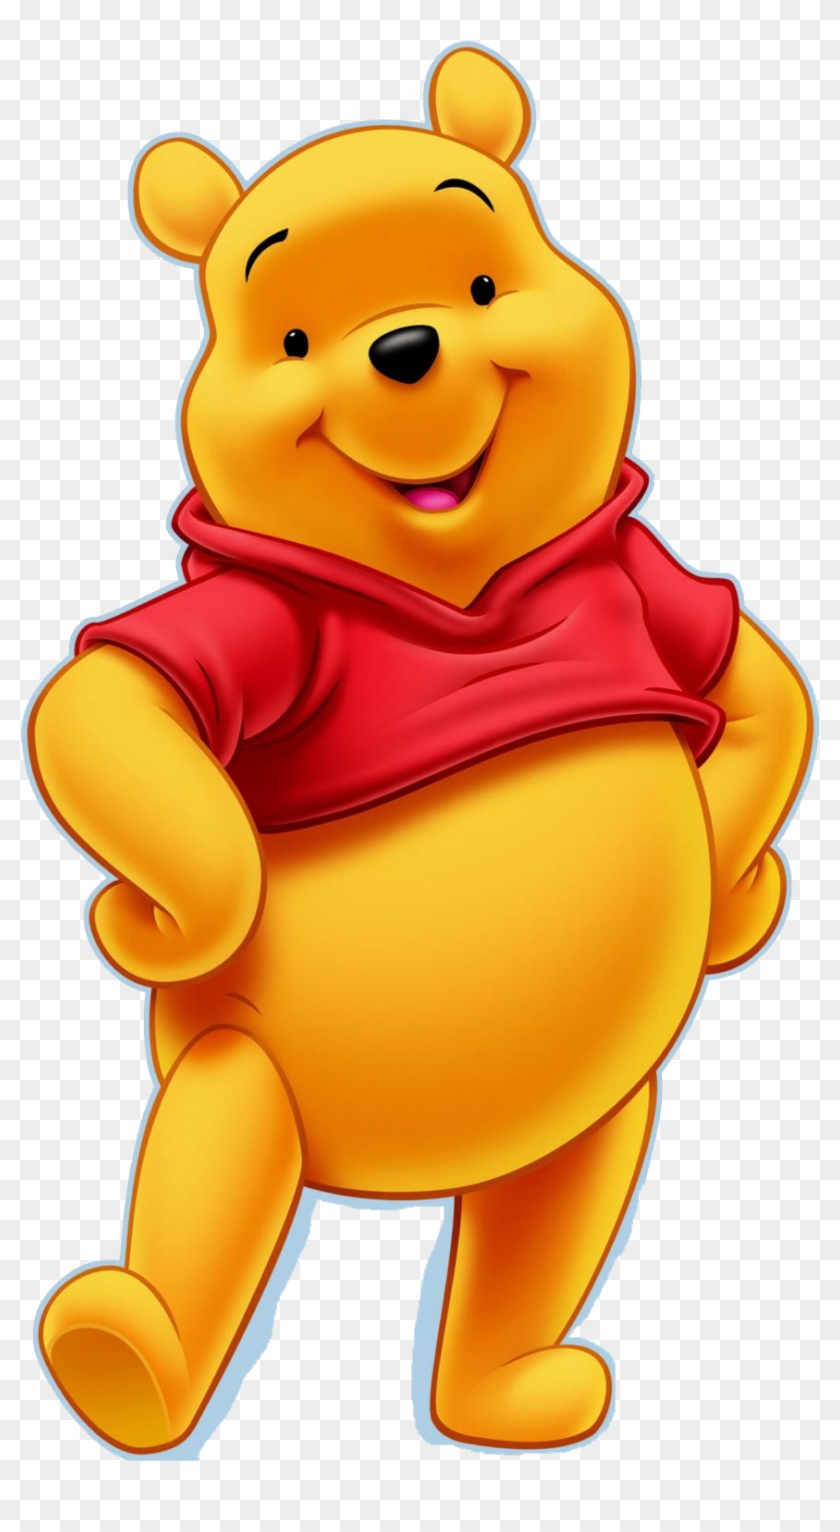 Winnie The Pooh Png File - Winnie The Pooh Clipart #350596